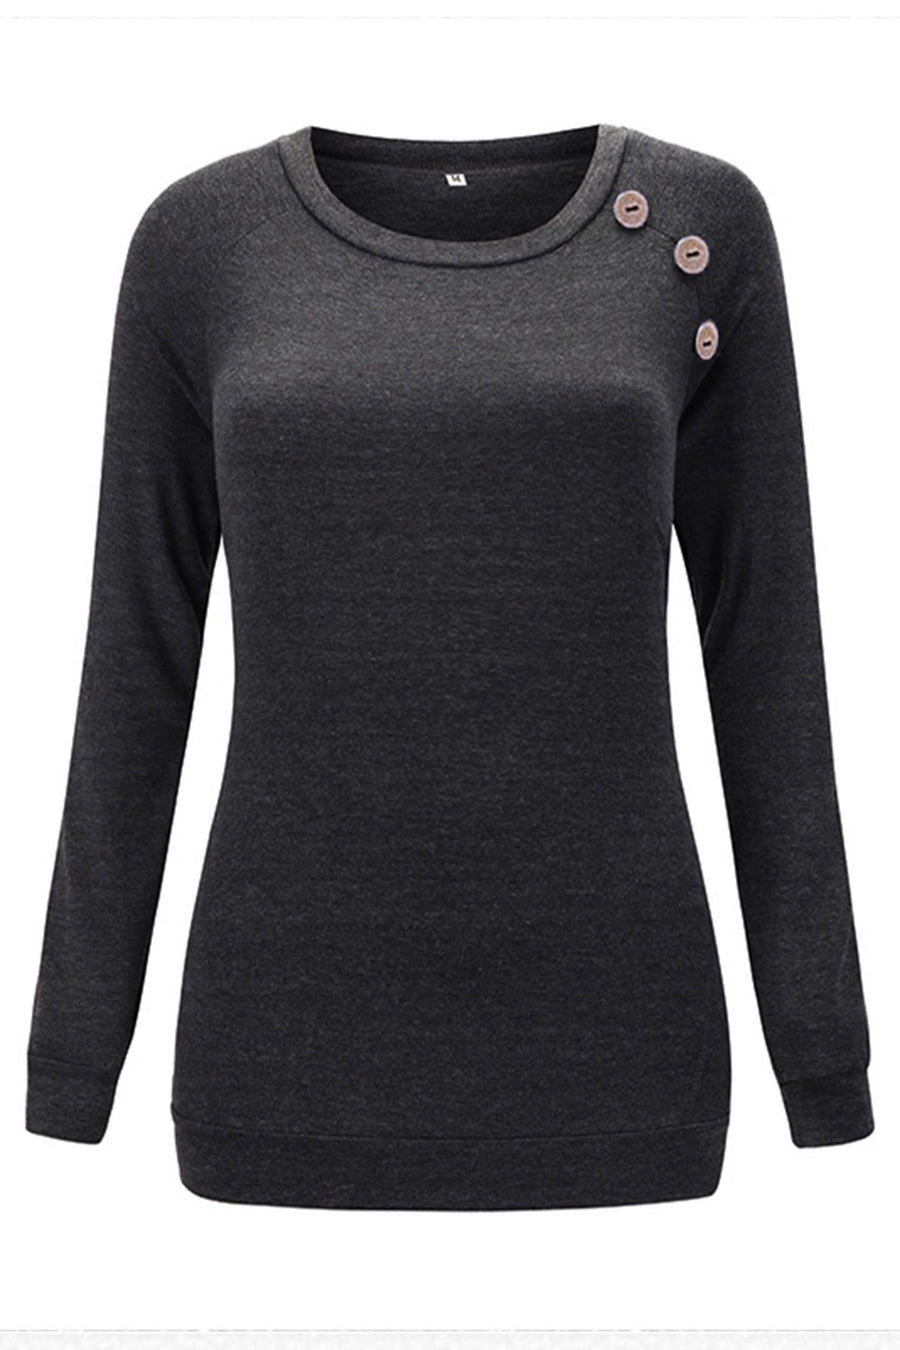 Women's Solid Crew Neck Raglan Button Stitched Long Sleeve T-shirt